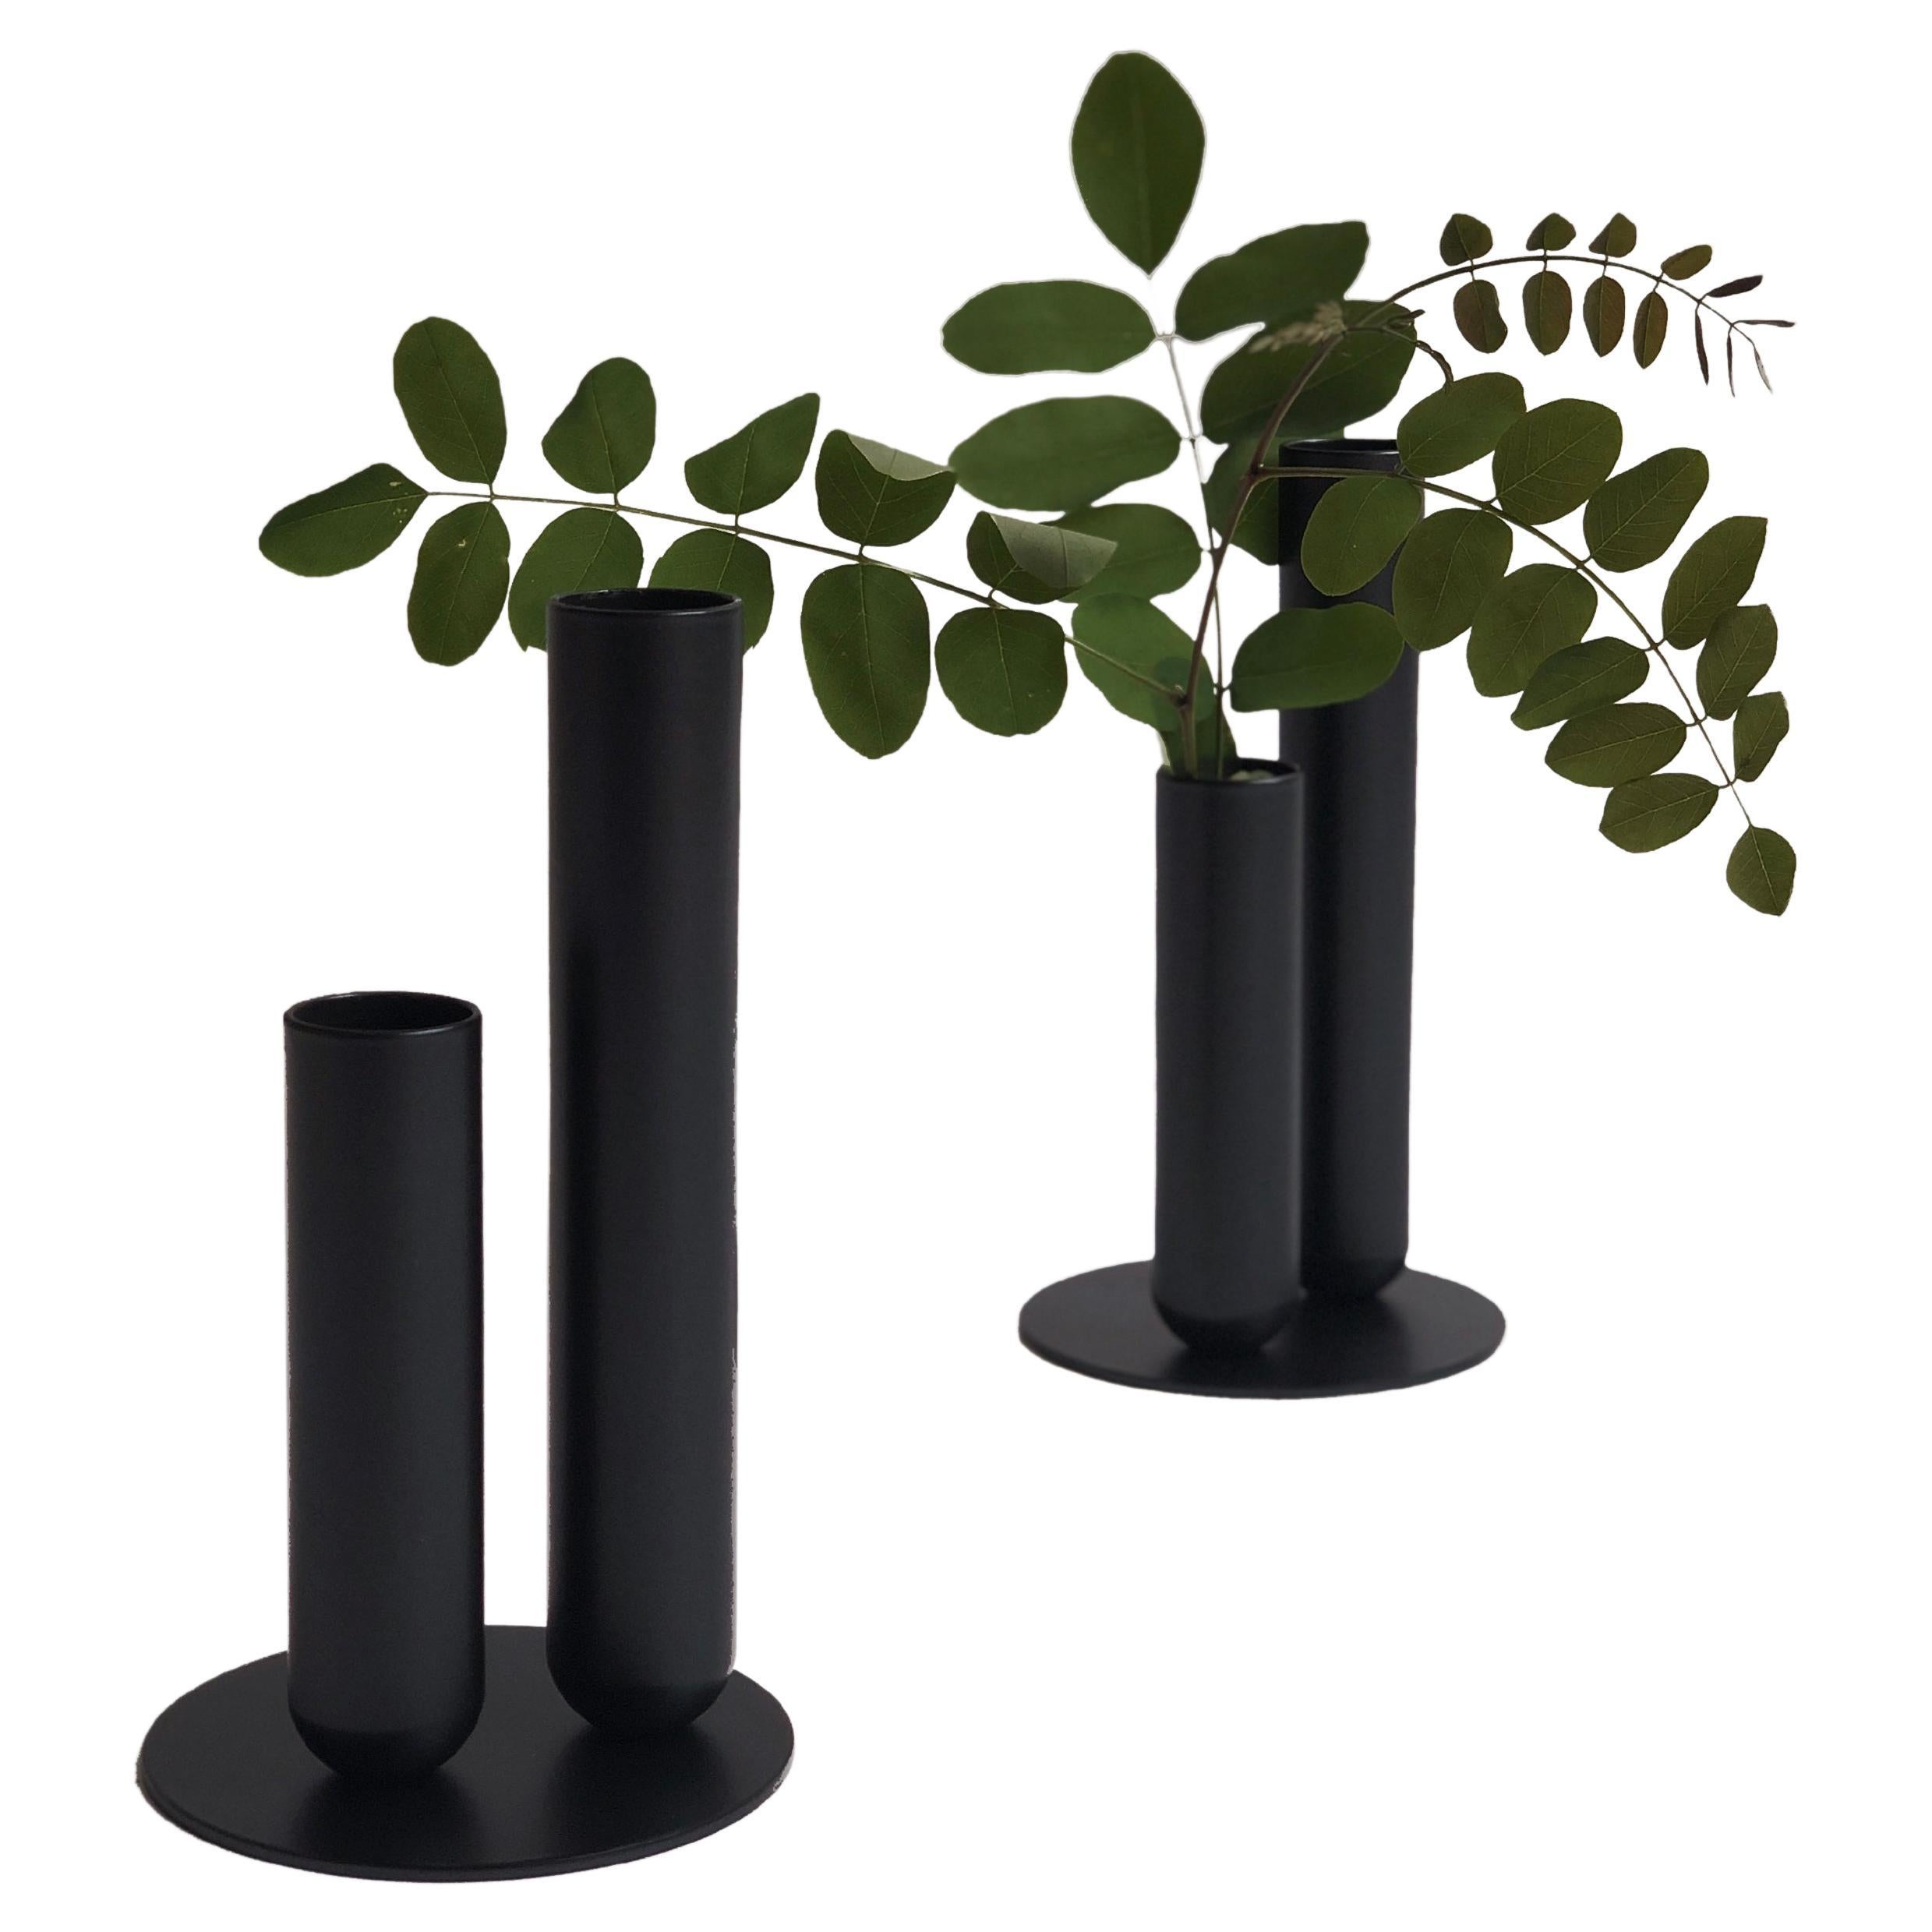 Set of 2 Soliflore Black Vases by Mademoiselle Jo For Sale